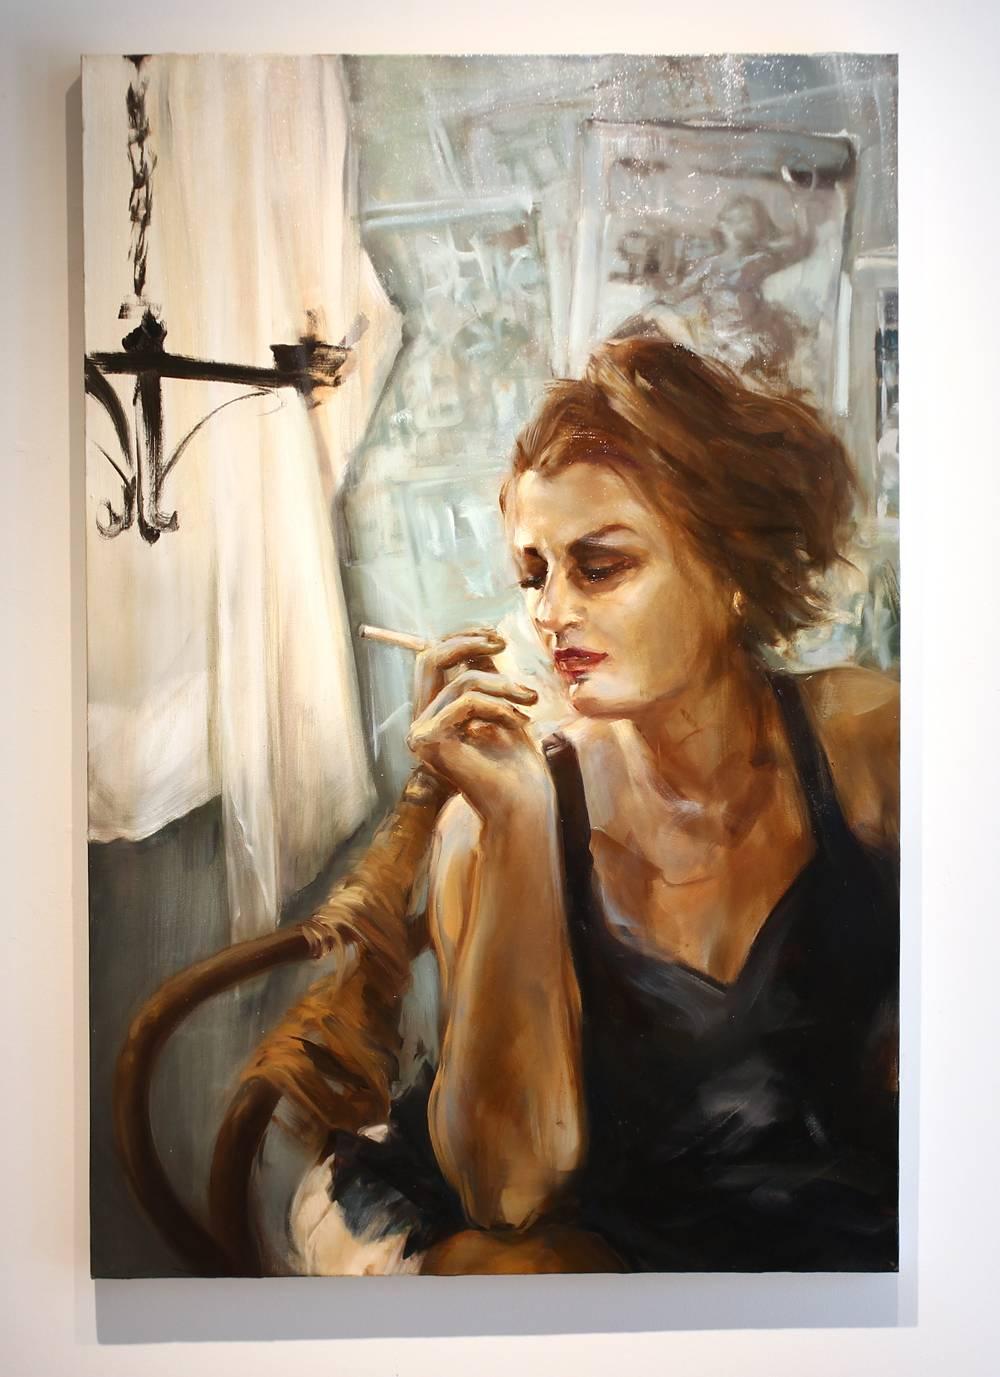 Cigarette White, figurative oil painting on canvas - Painting by Marilyn McAvoy